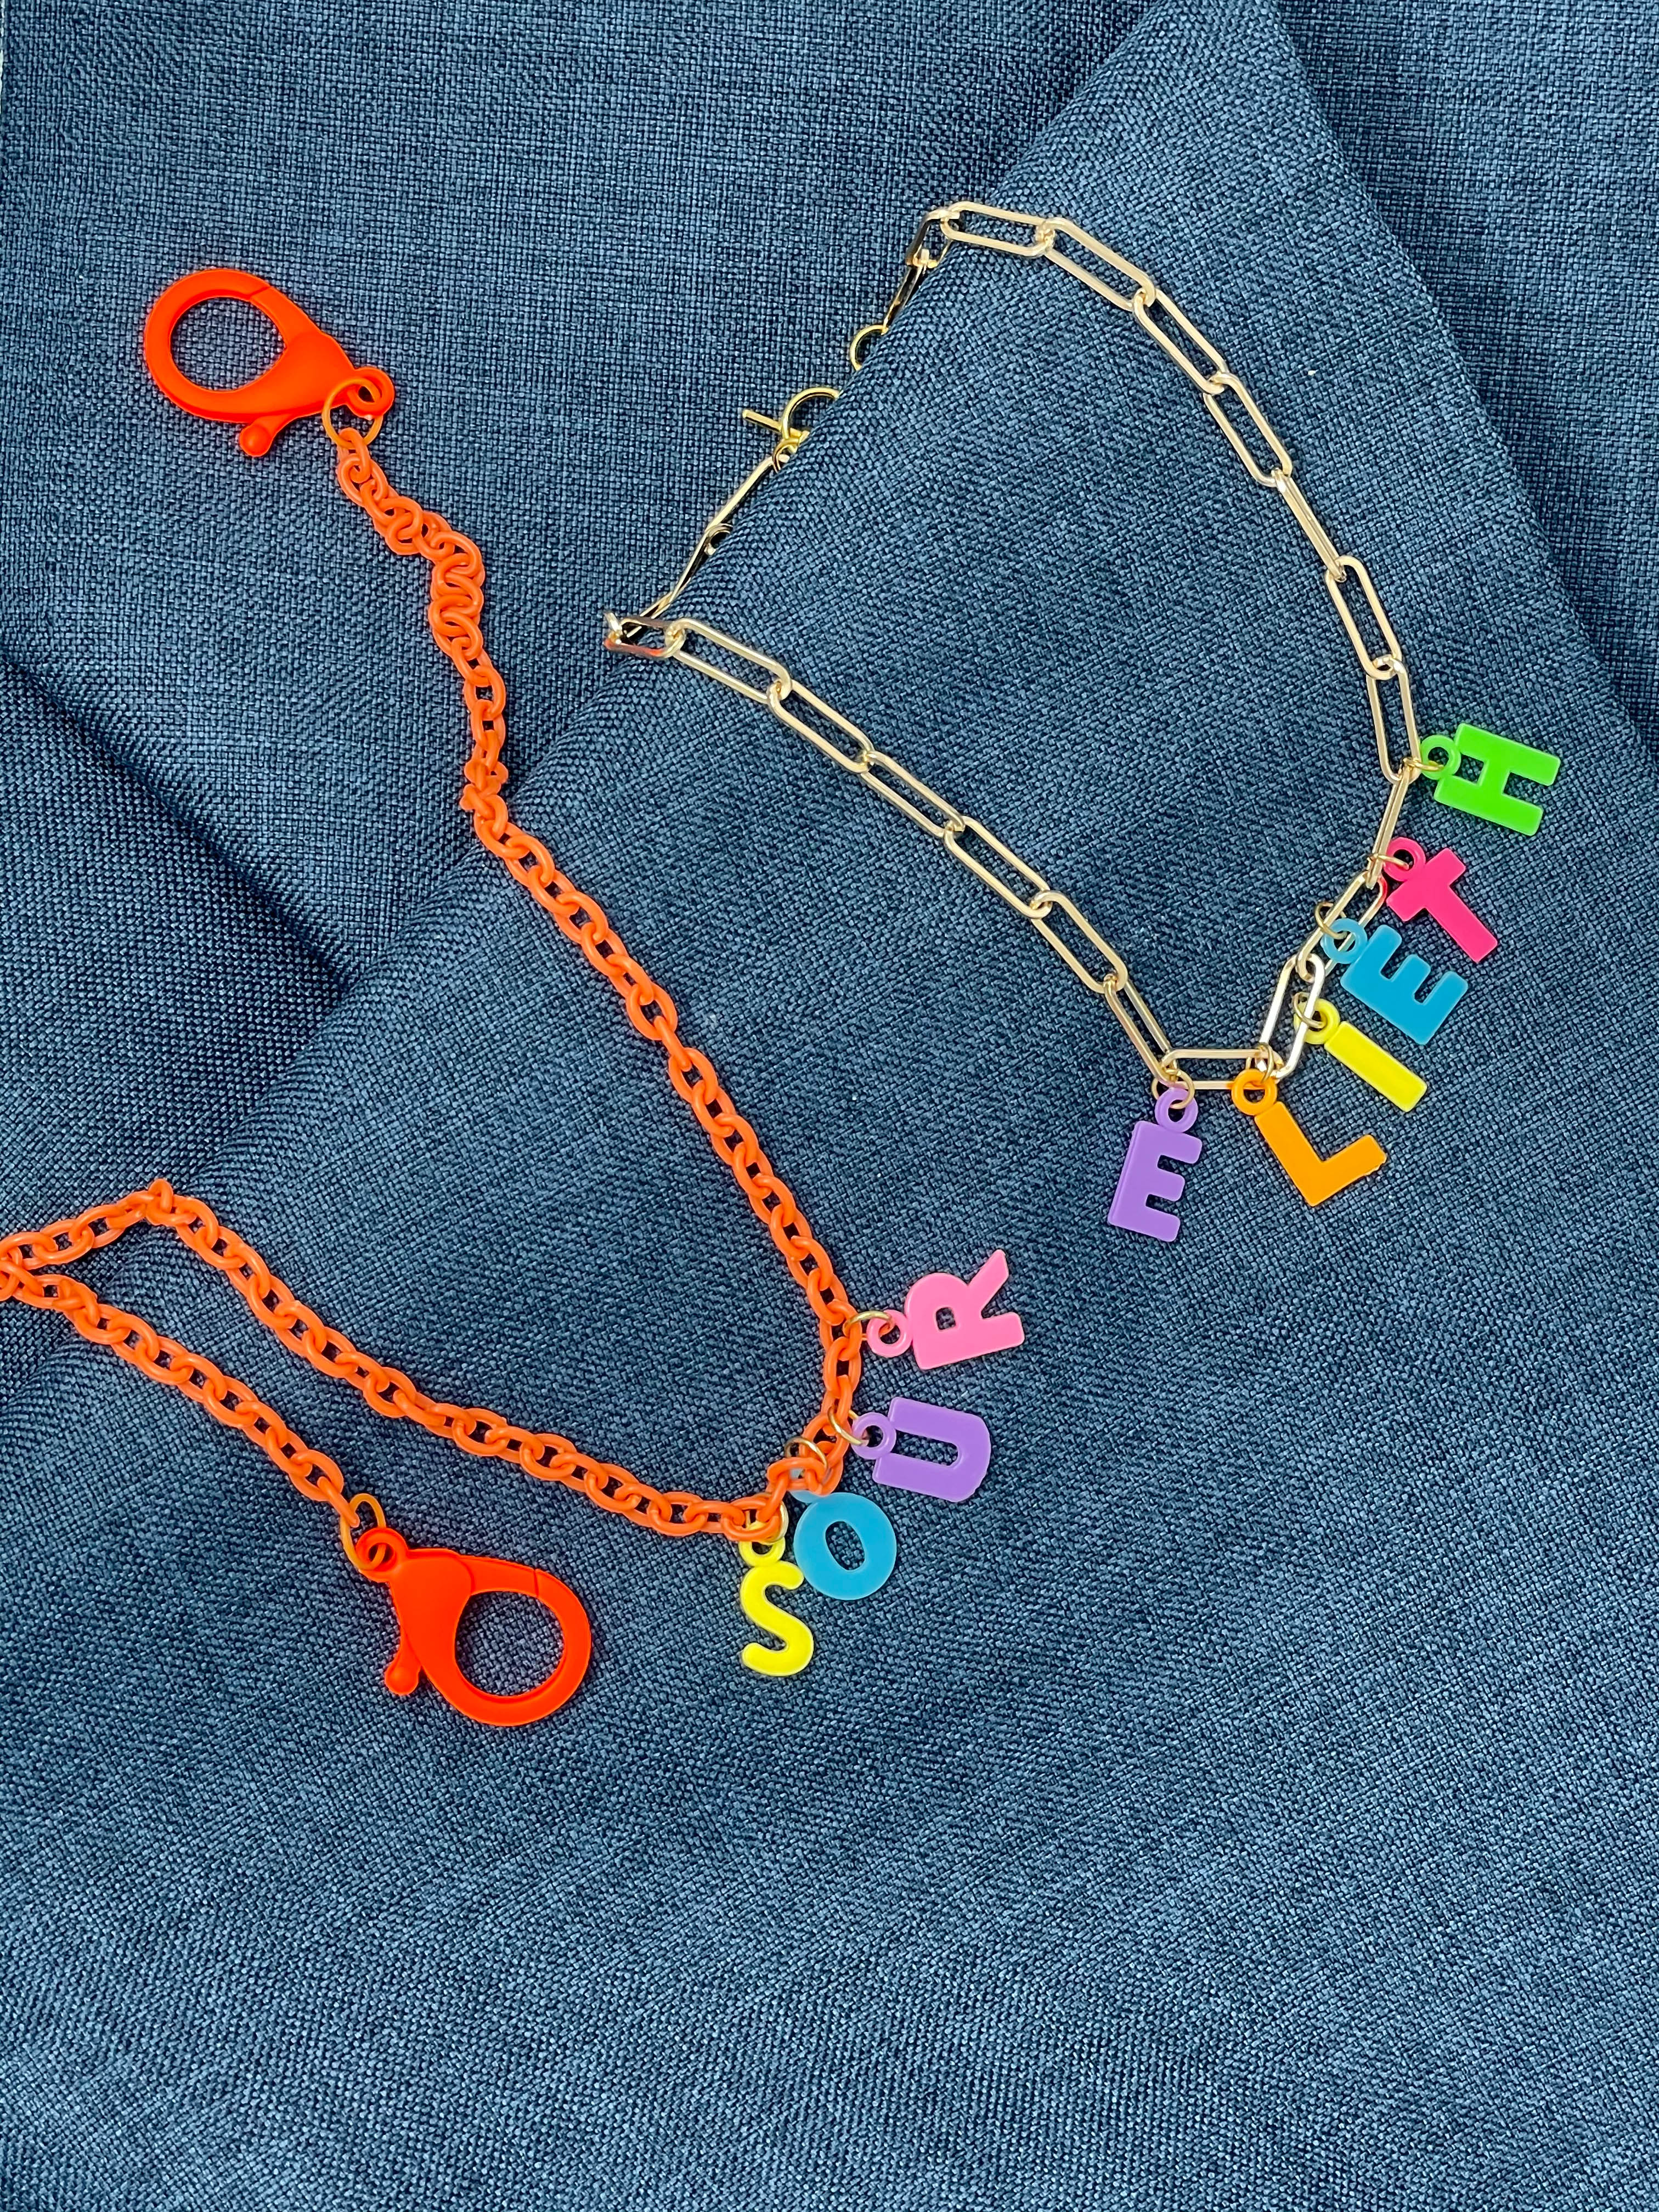 Face Mask Holder with Colorful Chain and Letters - Custom Made